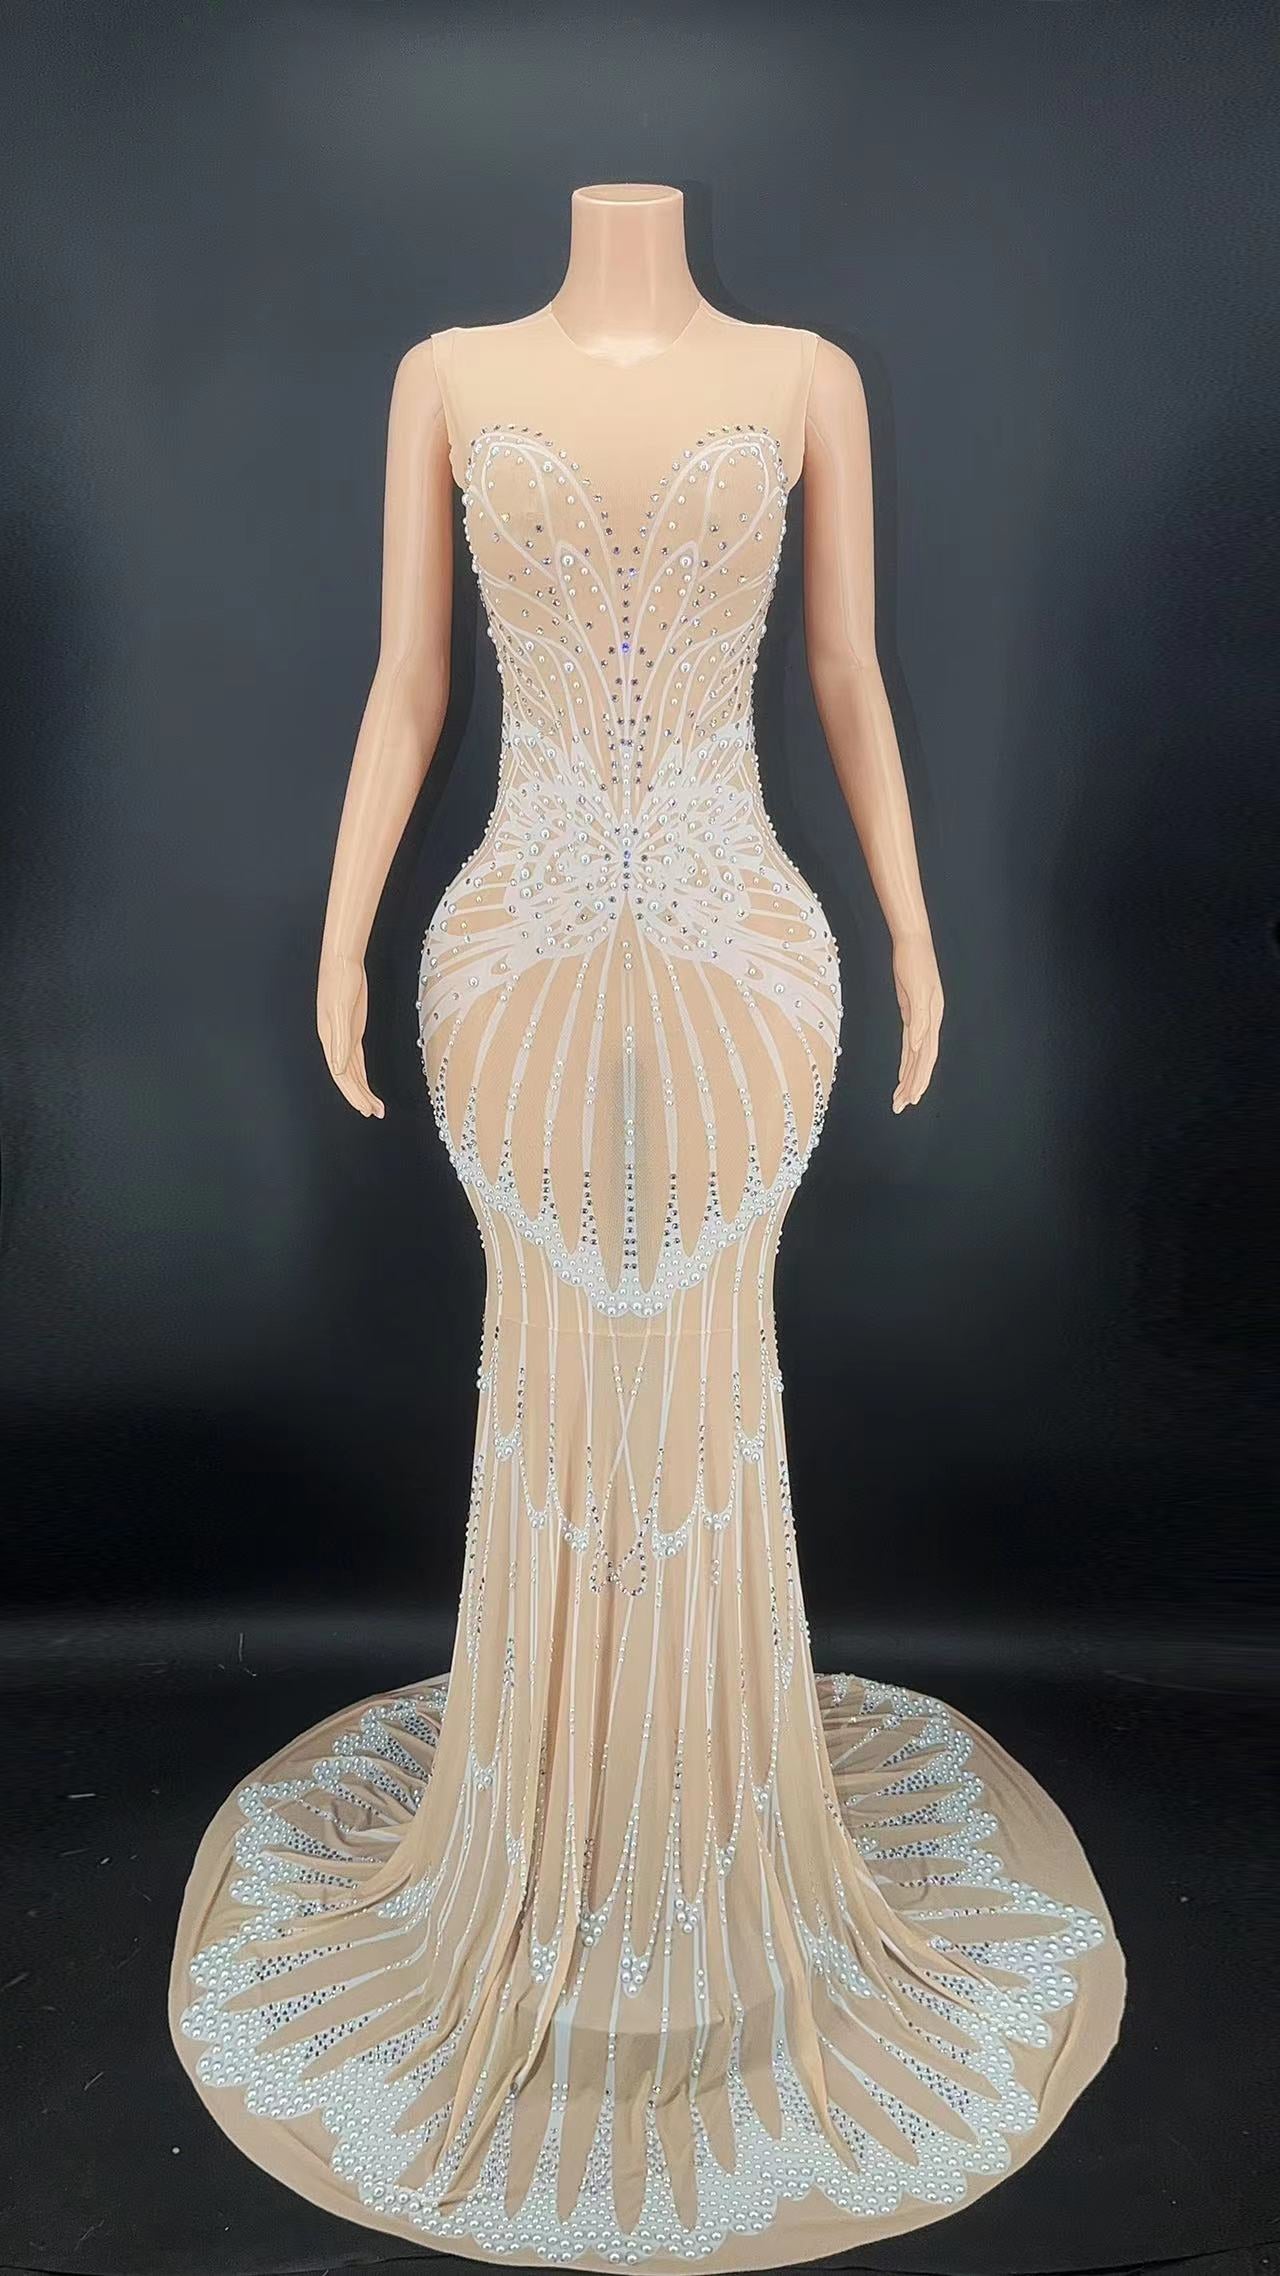 Women Sexy Evening Prom Celebrite Gown Dresses Sparkly Rhinestone Pearls Mesh Transparent Long Dress Singer Show Stage Host Wear